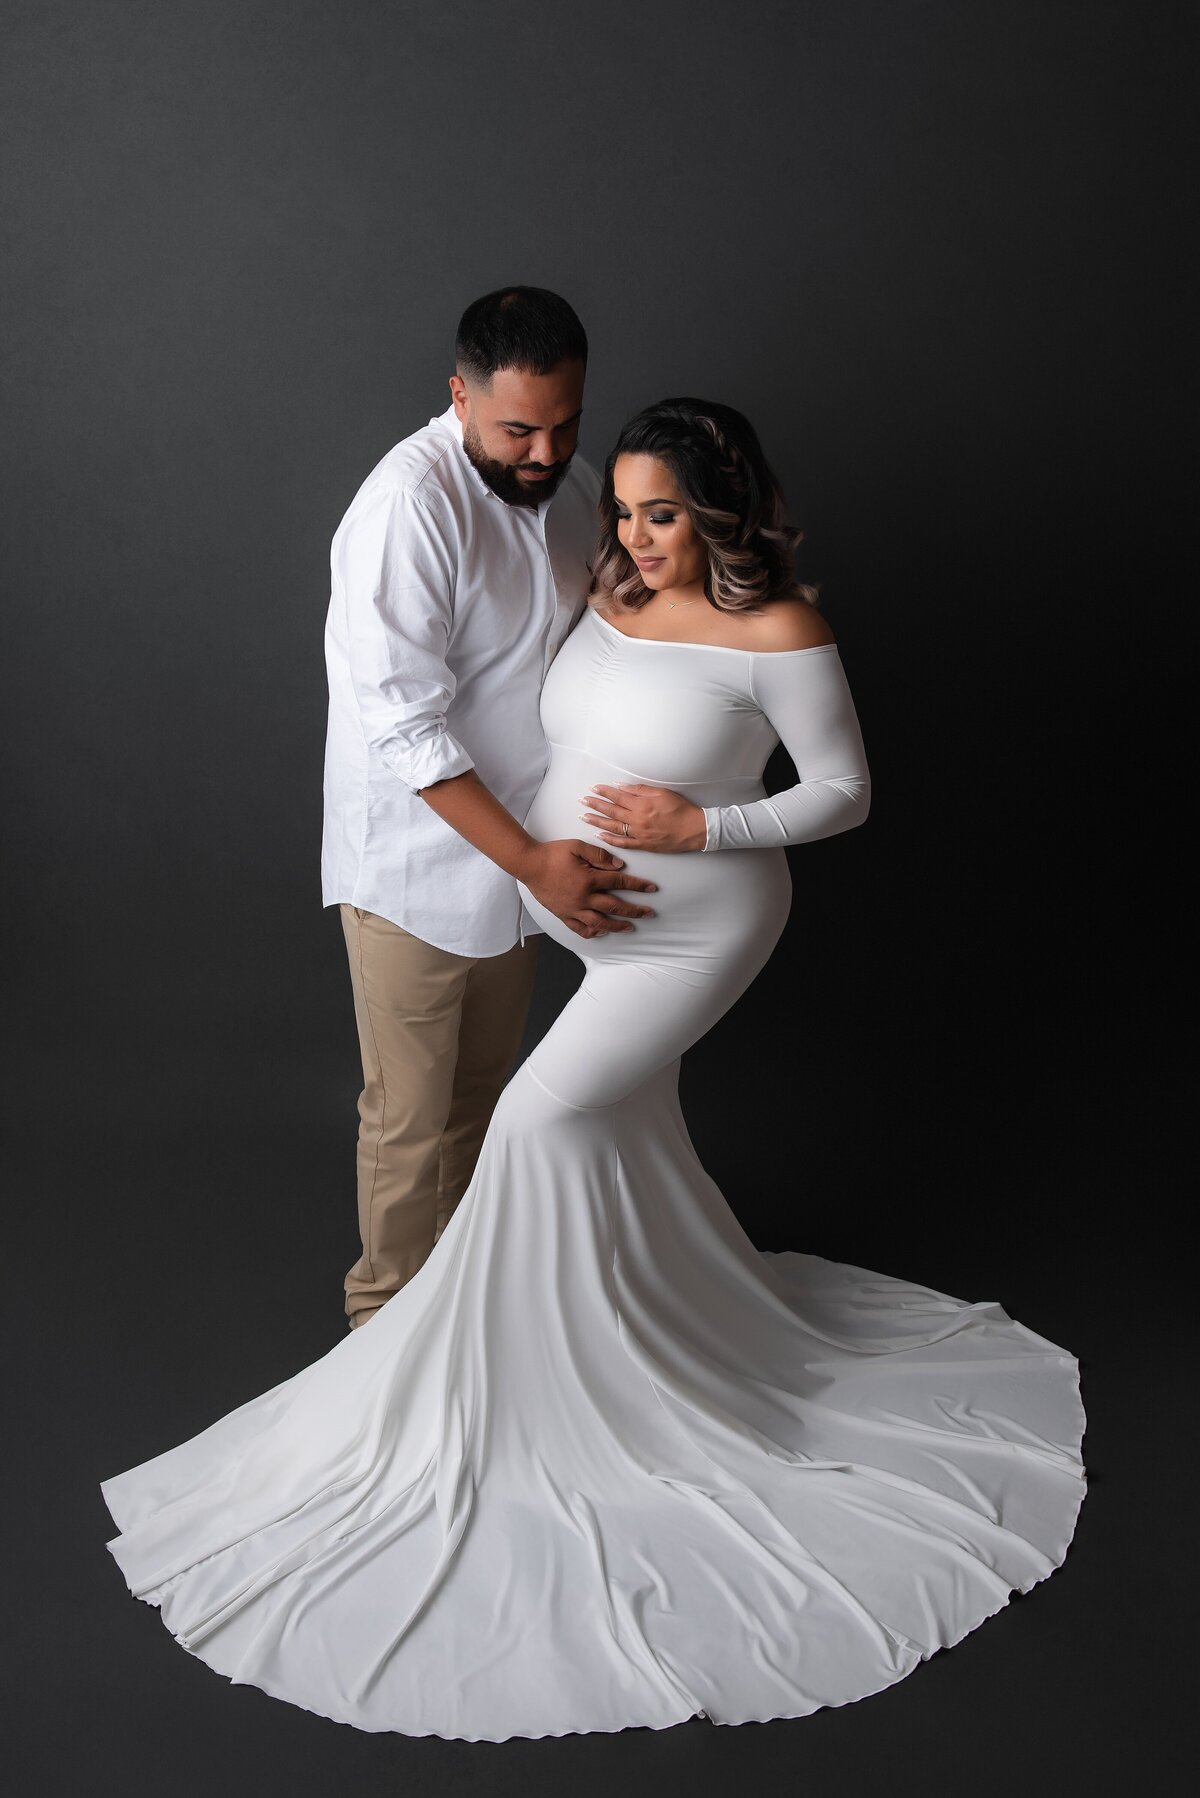 A couple maternity photoshoot studio in West Palm Beach with gray backdrop and white gown.